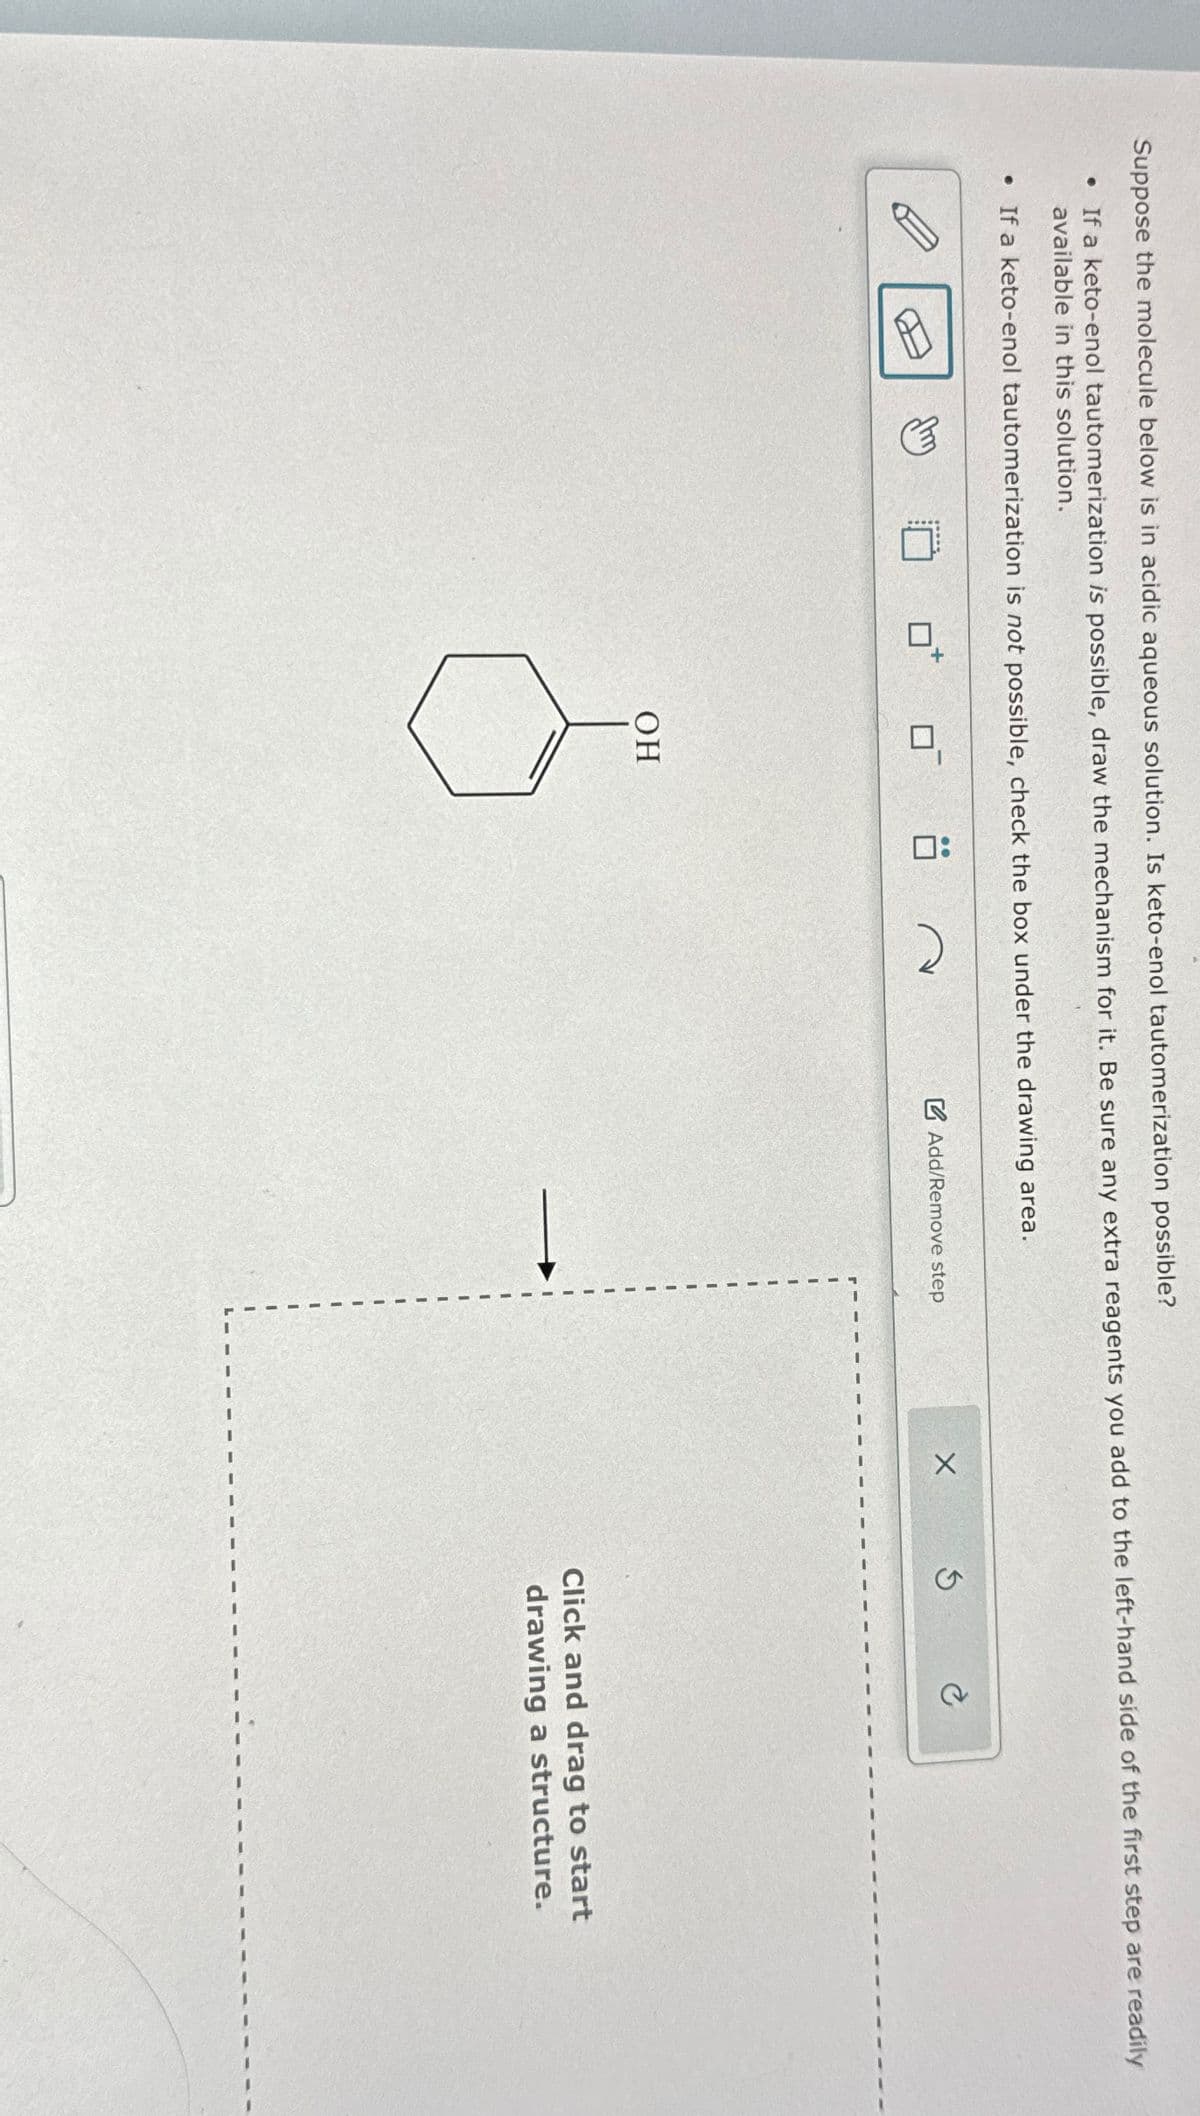 A
Suppose the molecule below is in acidic aqueous solution. Is keto-enol tautomerization possible?
• If a keto-enol tautomerization is possible, draw the mechanism for it. Be sure any extra reagents you add to the left-hand side of the first step are readily
available in this solution.
• If a keto-enol tautomerization is not possible, check the box under the drawing area.
OH
2
Add/Remove step
X
G
Click and drag to start
drawing a structure.